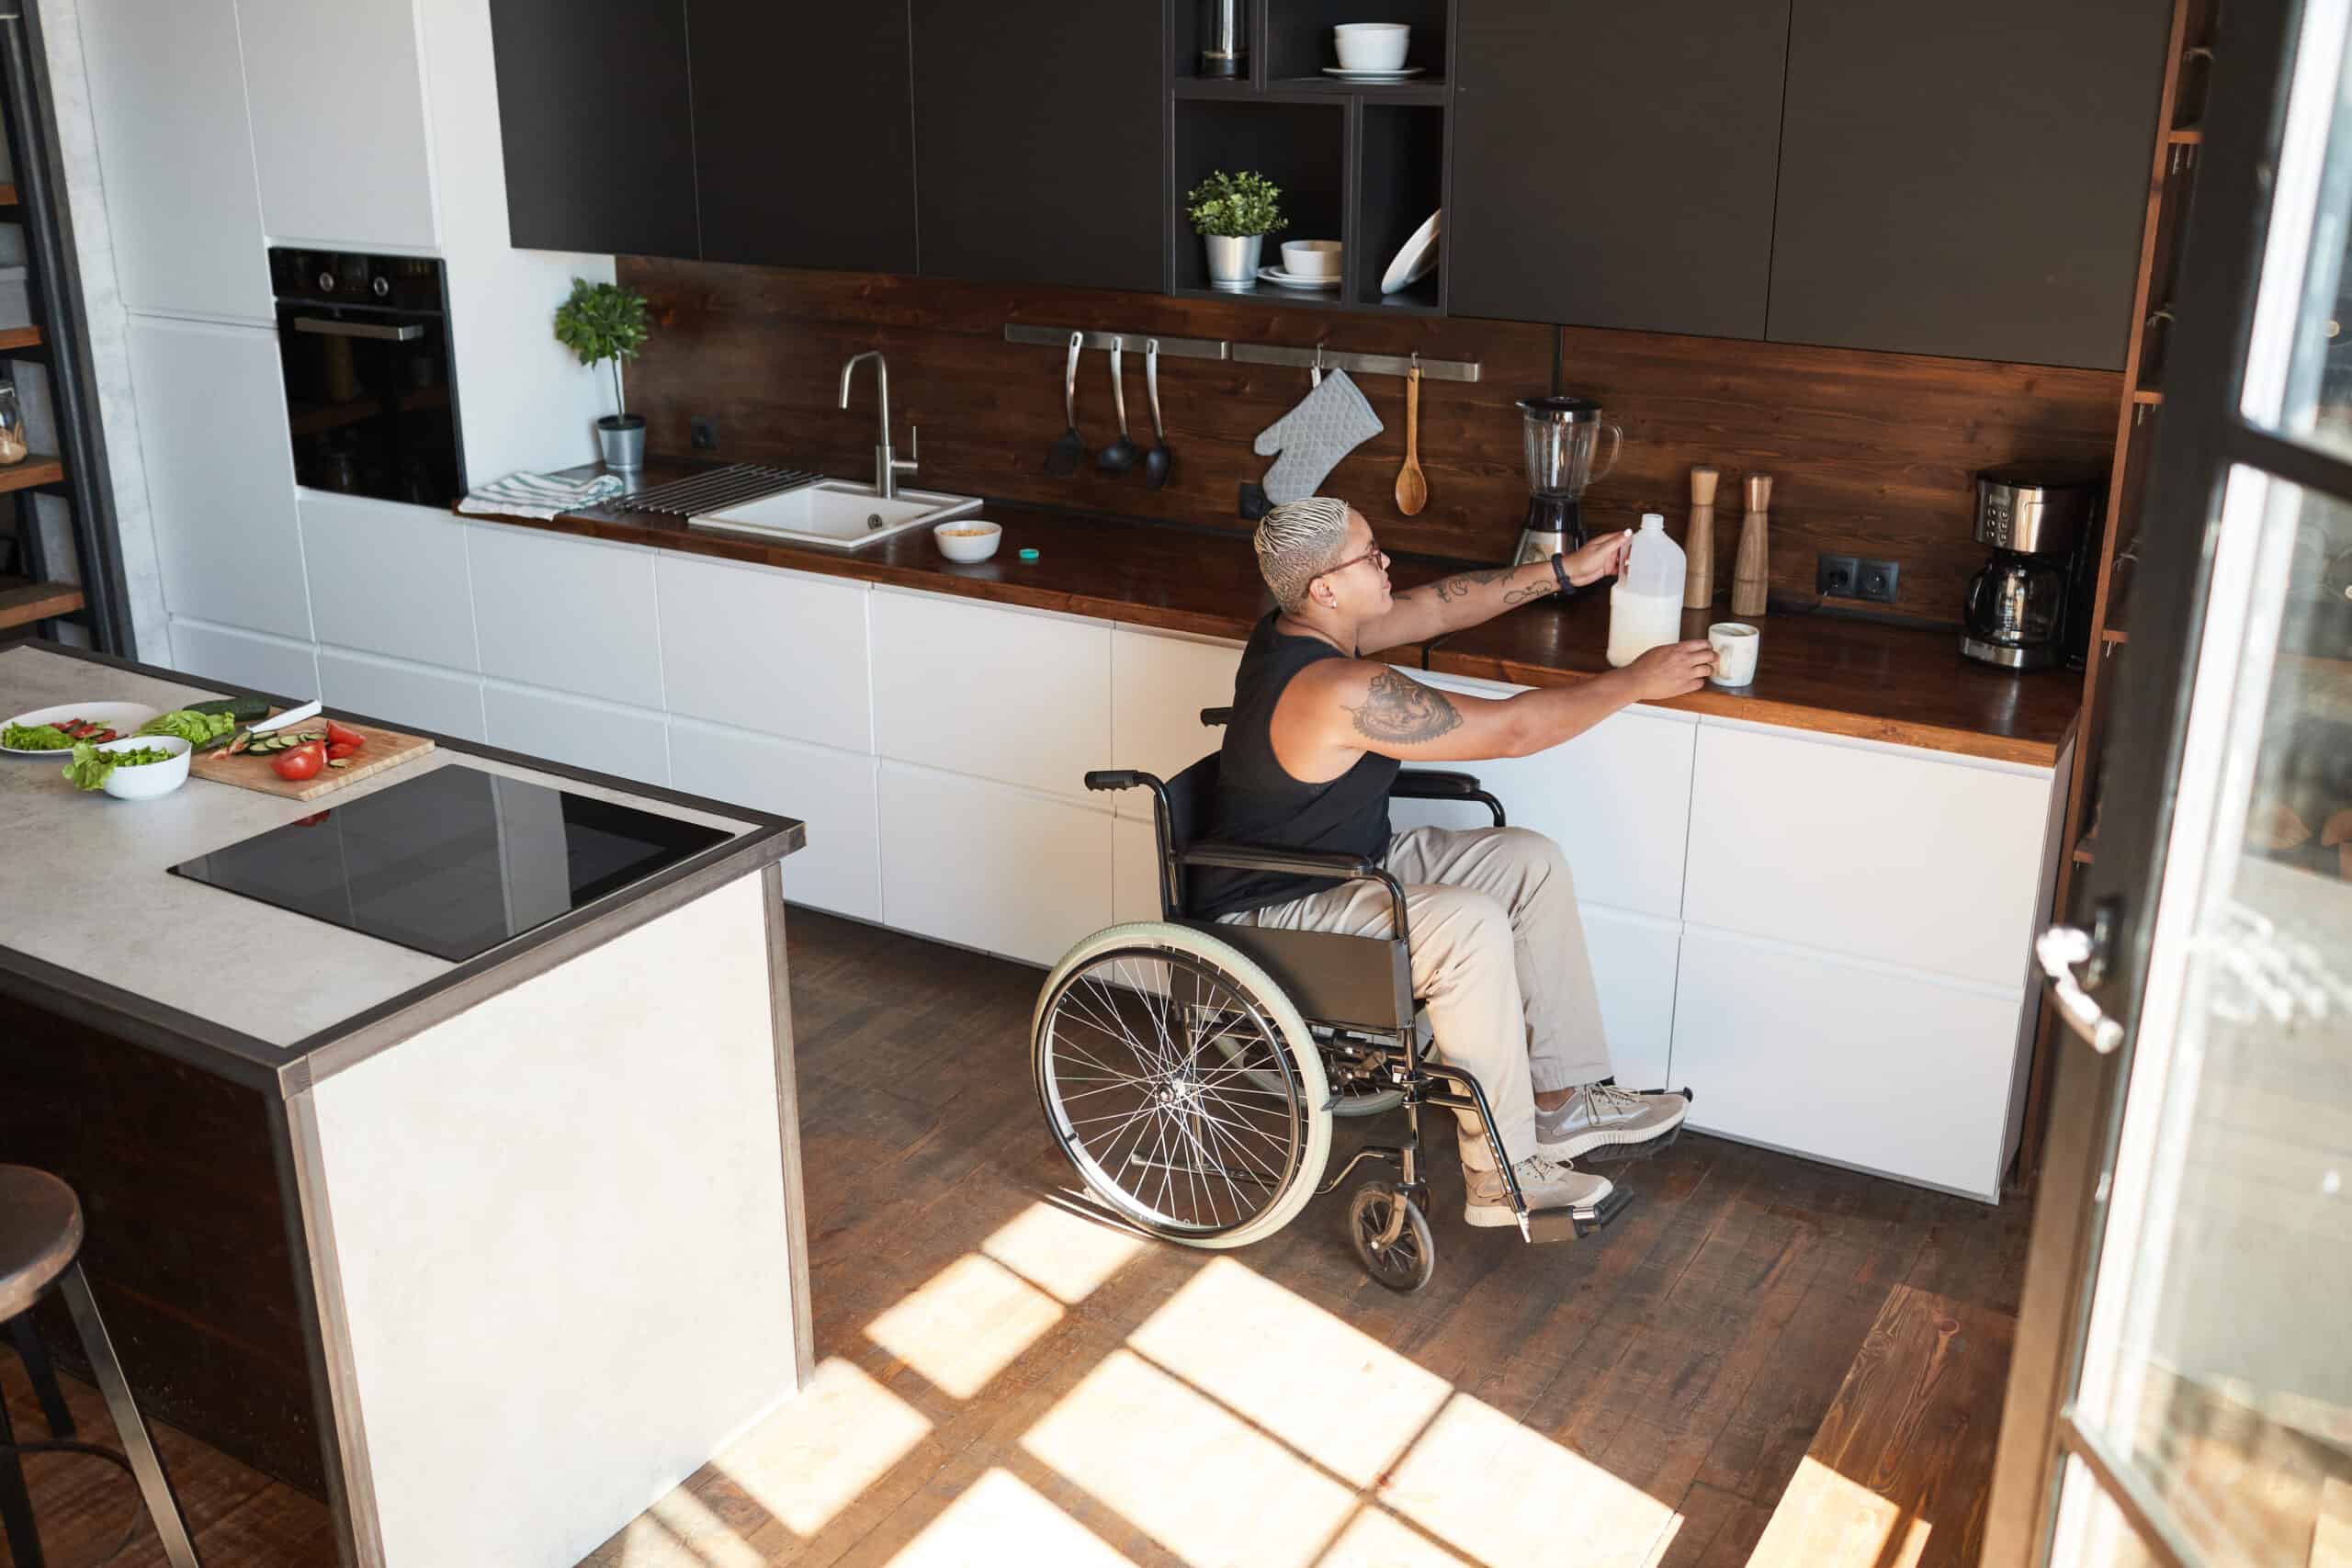 Afea specialist disability accommodation